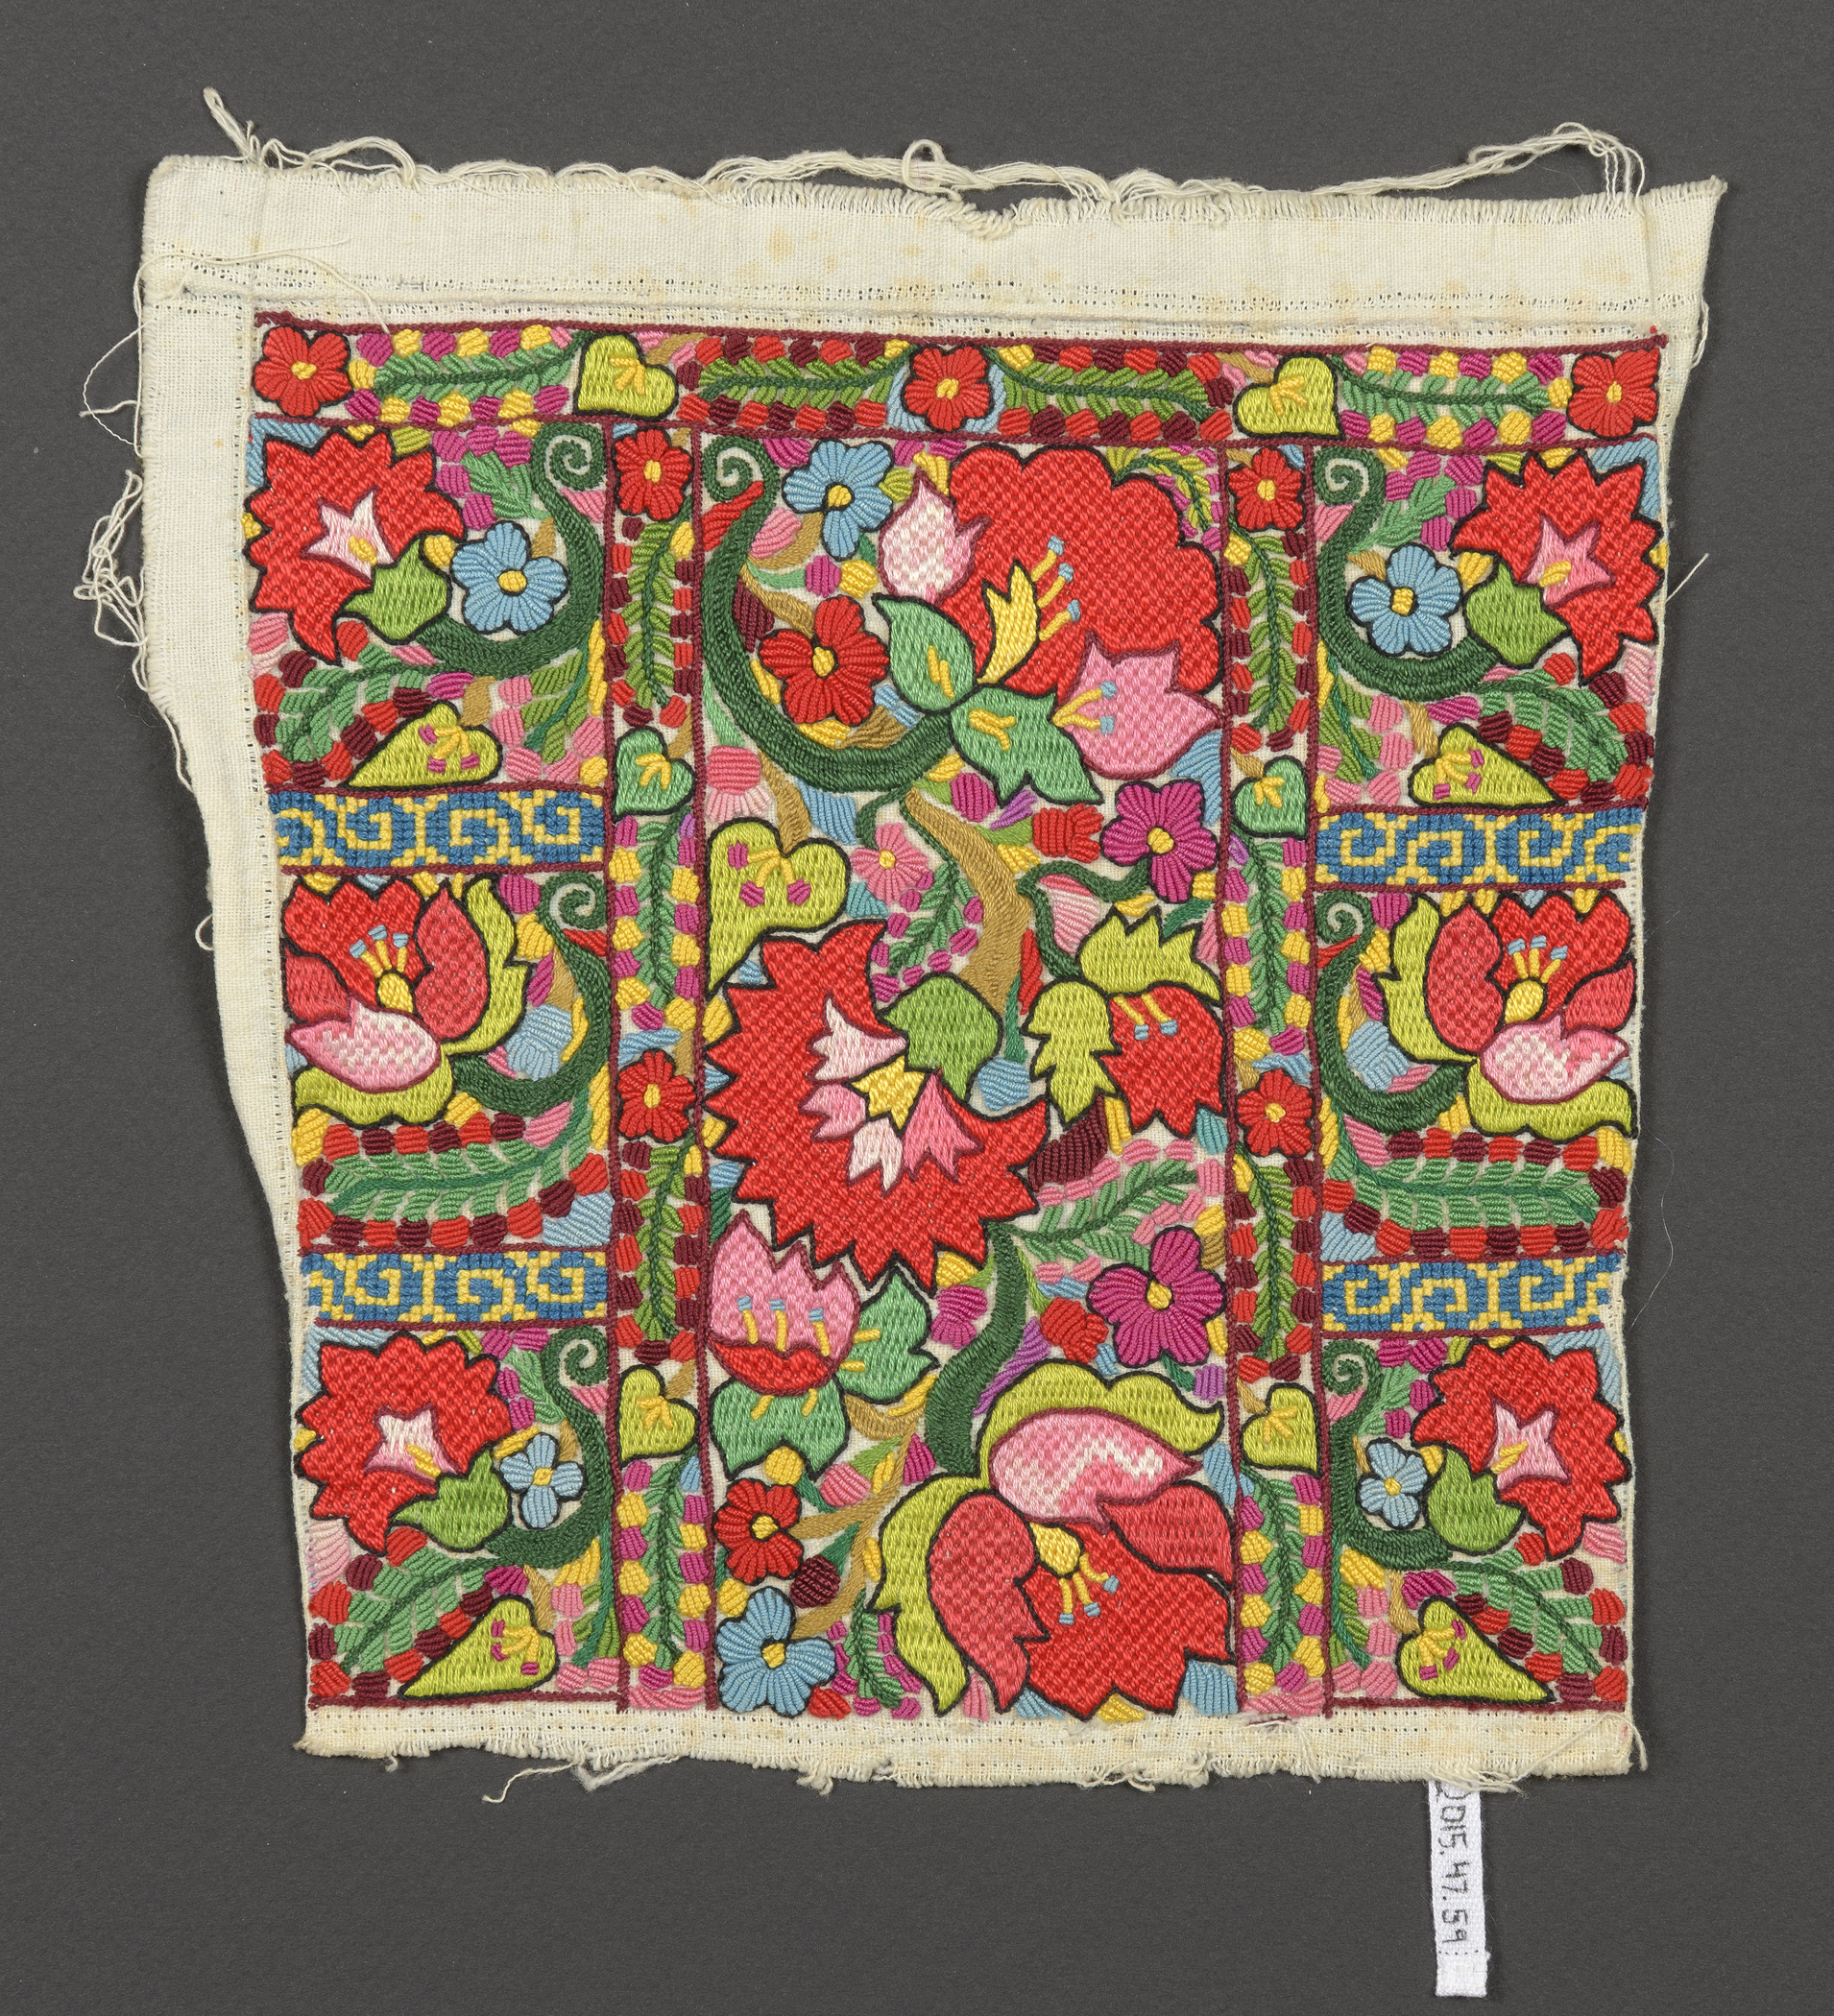 2015.0047.059 Textile fragment, embroidered, view 1